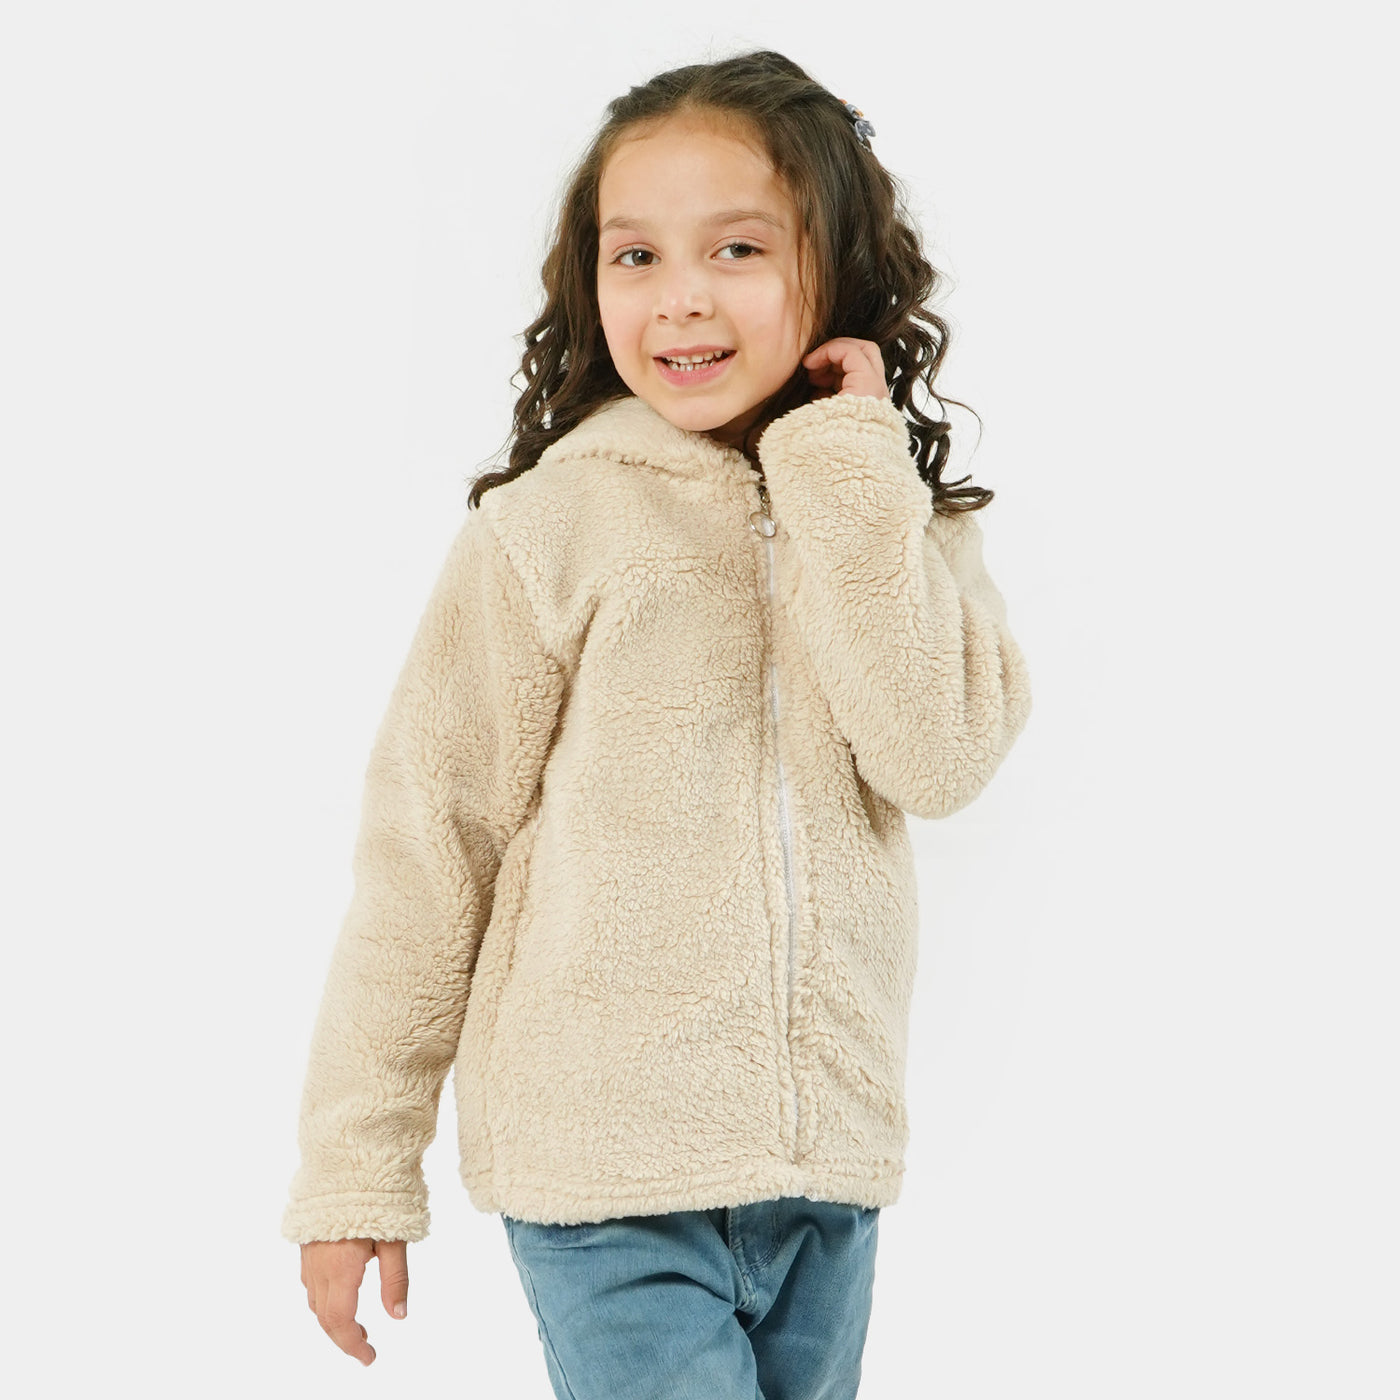 Girls Knitted Jacket Character - Off White